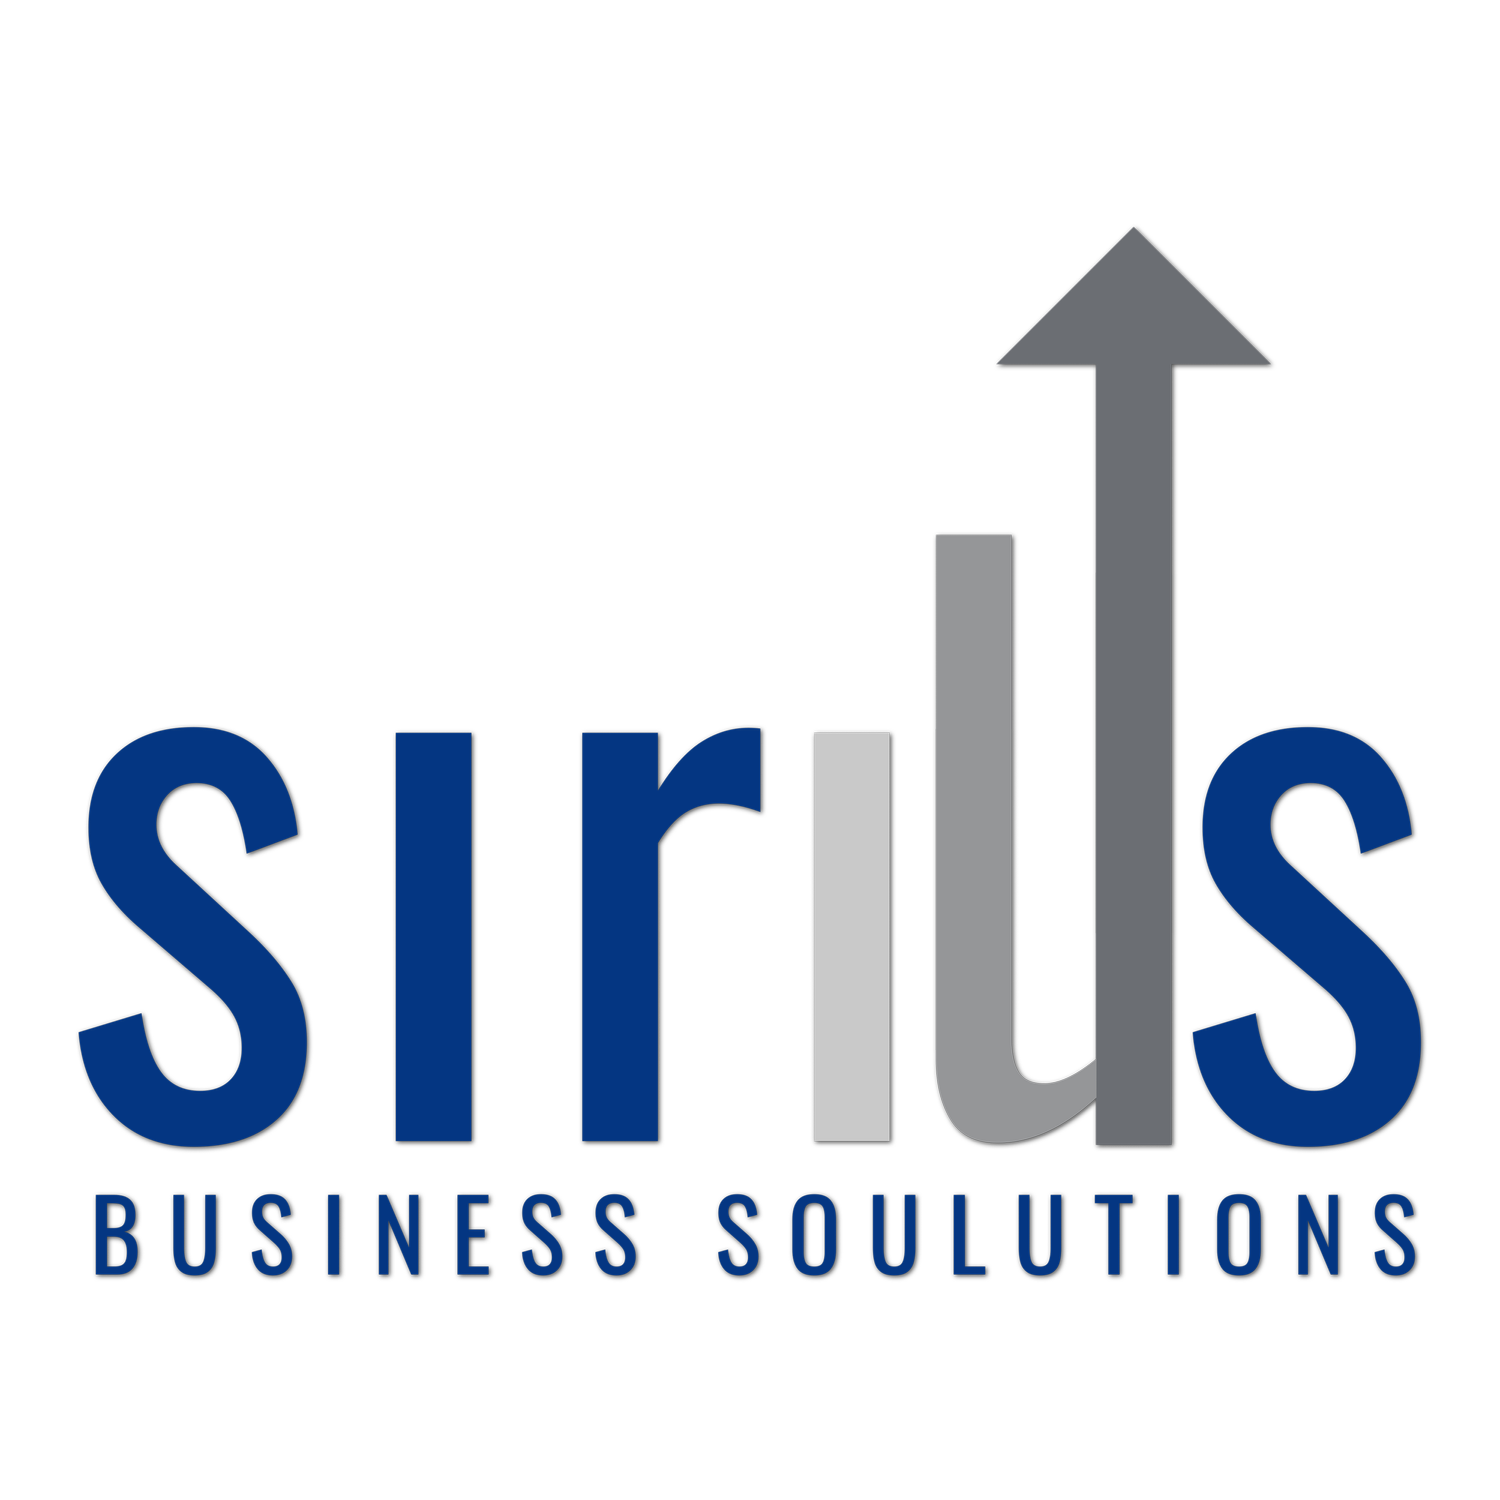 Sirius Business Solutions